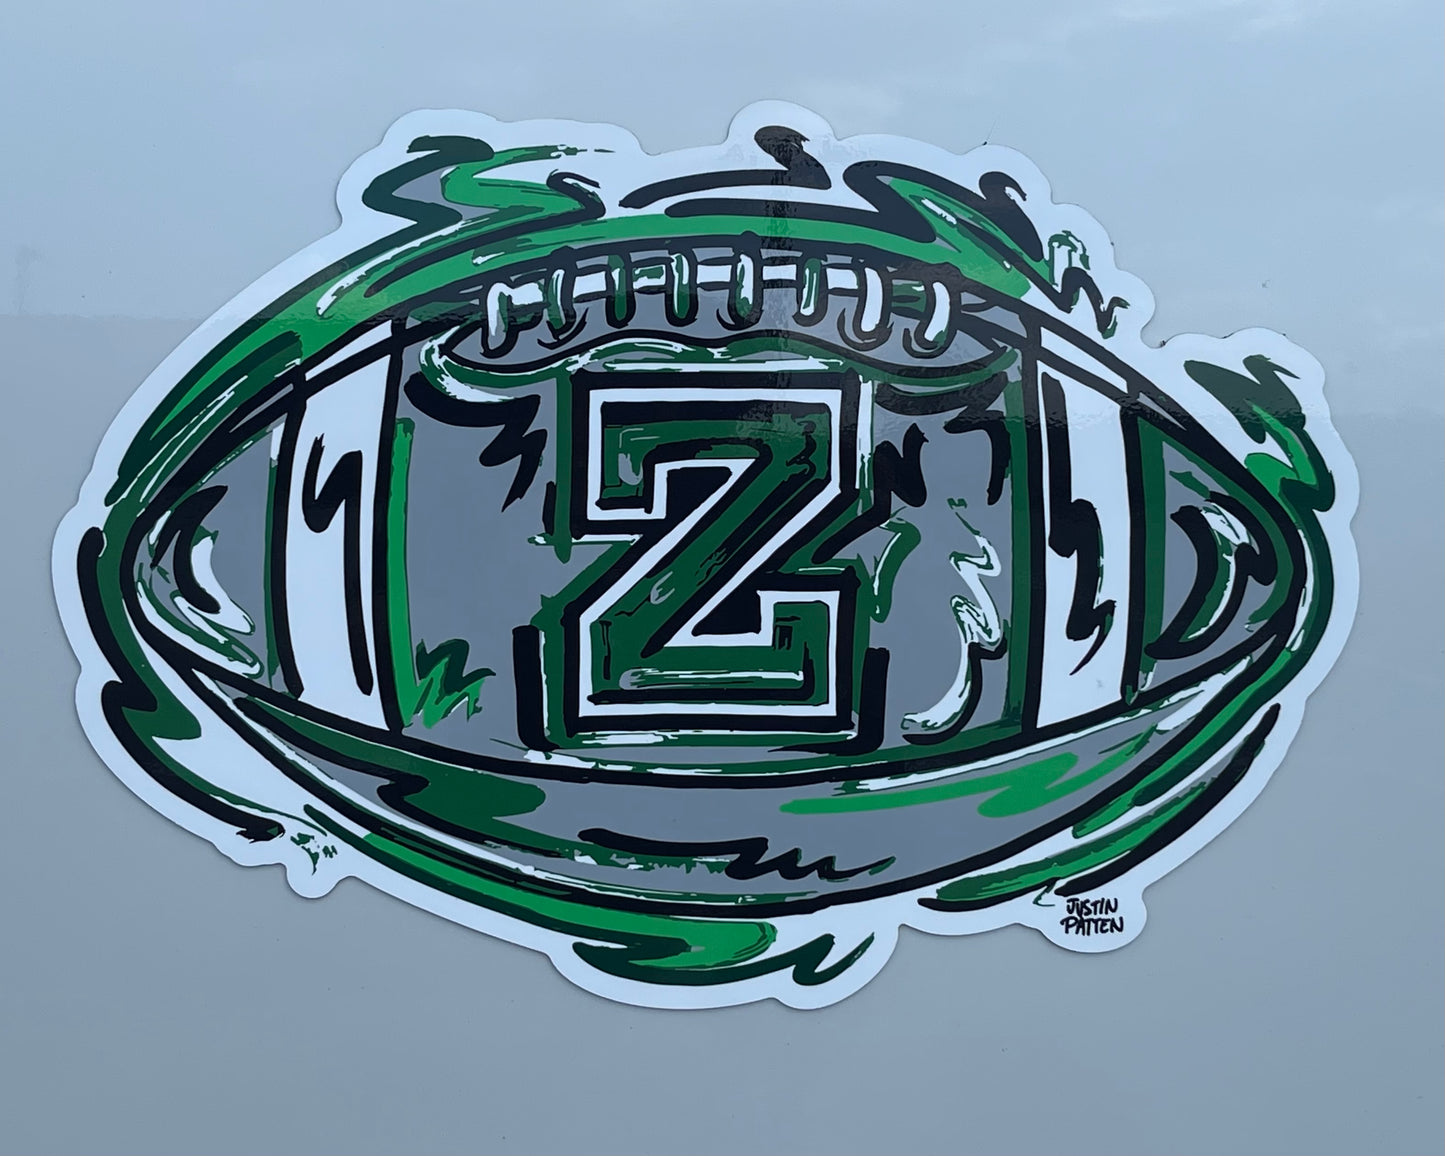 Zionsville Indiana Football Magnet by Justin Patten